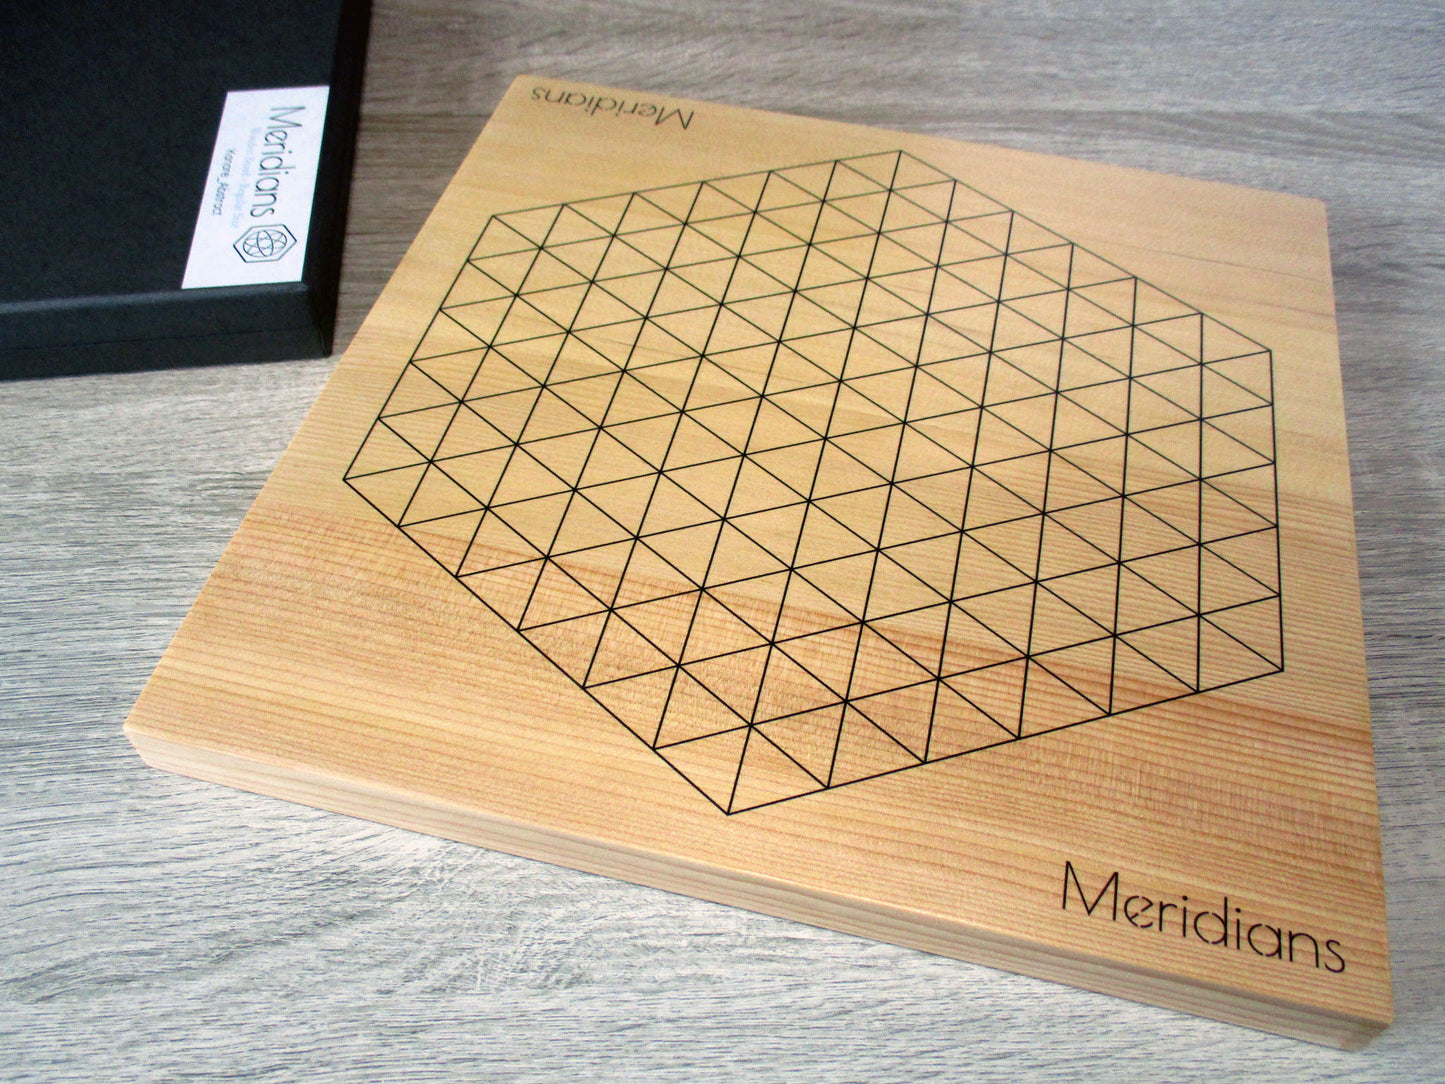 Meridians Wooden Edition